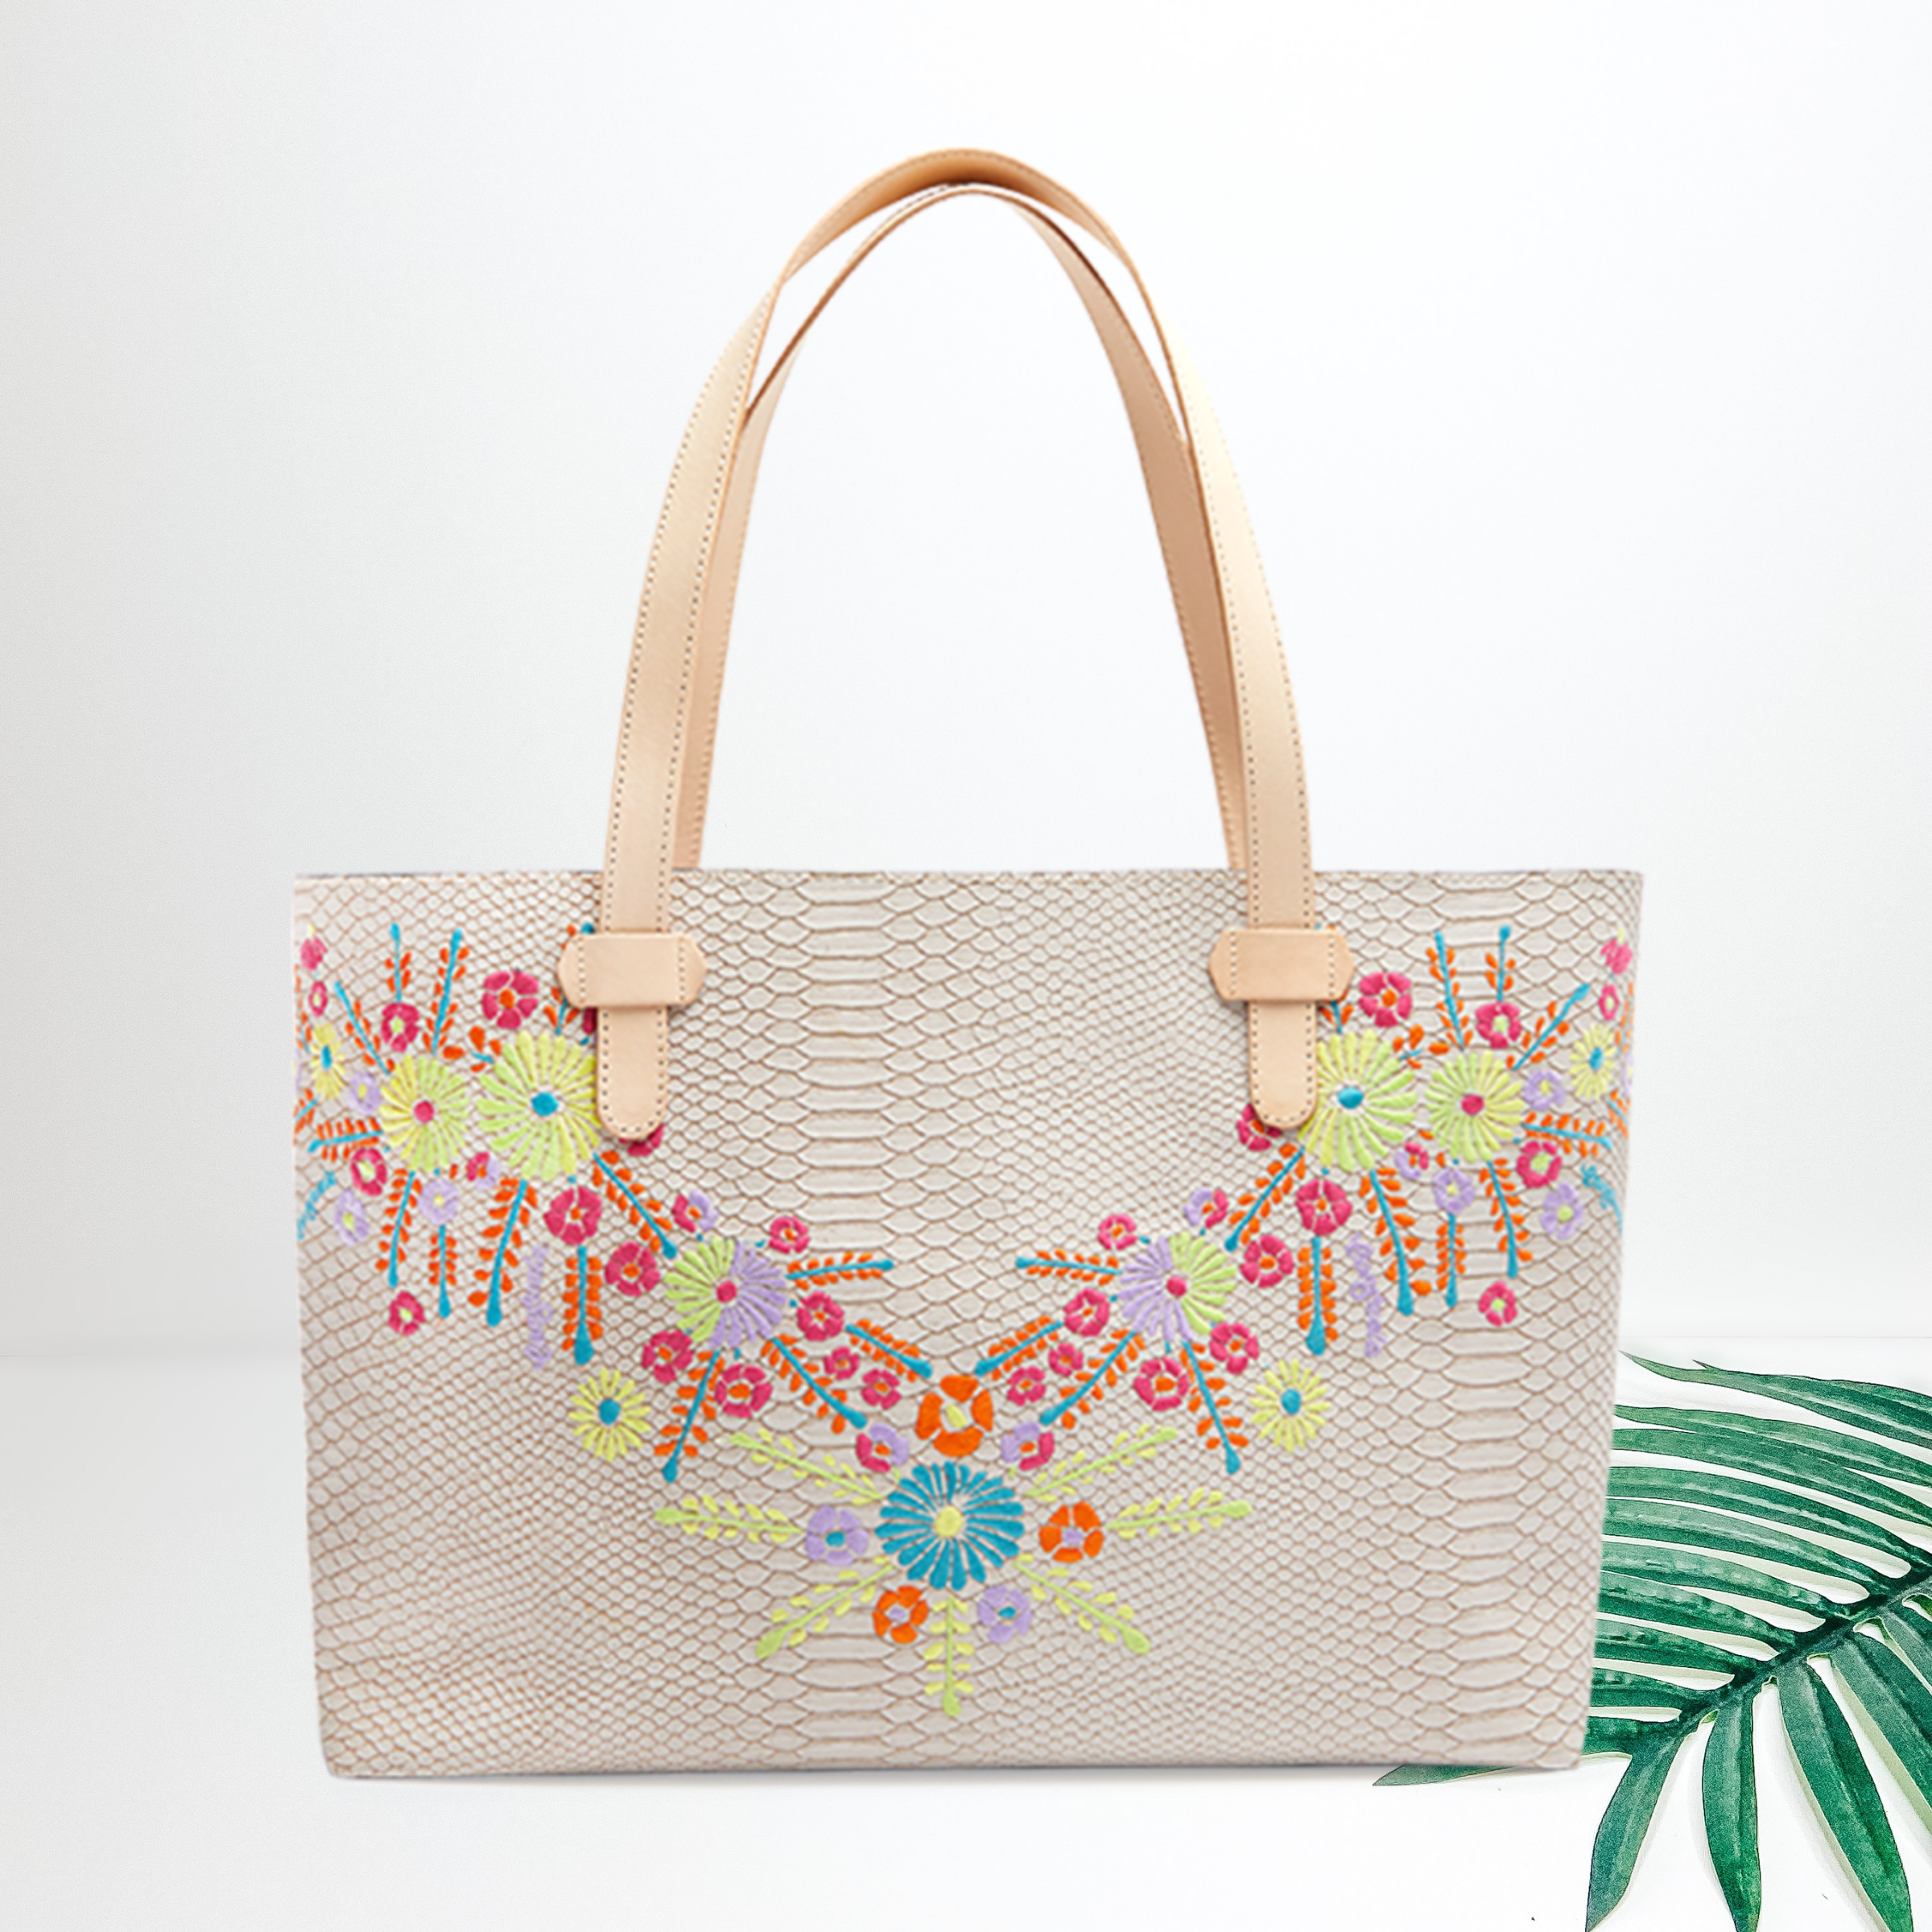 Centered in the picture is a large tote that has yellow, orange, blue, purple and pink embroidery along the sides. To the right of the tote is a palm leaf on a white background. 